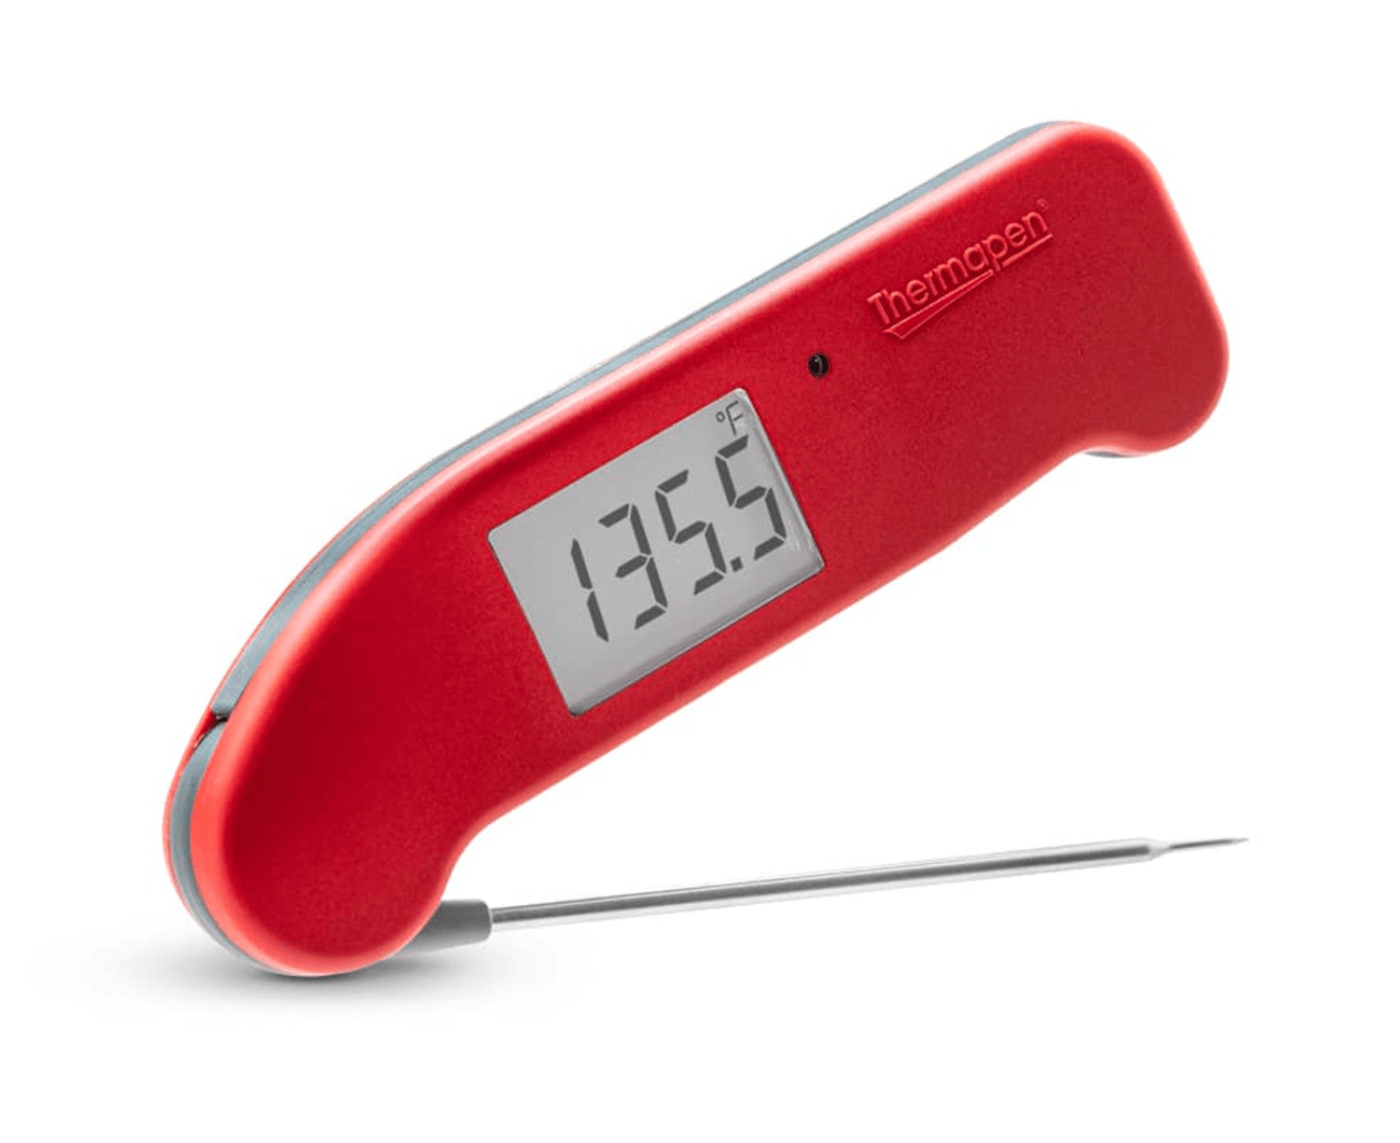 Our favorite instant-read meat thermometer is on sale for $79